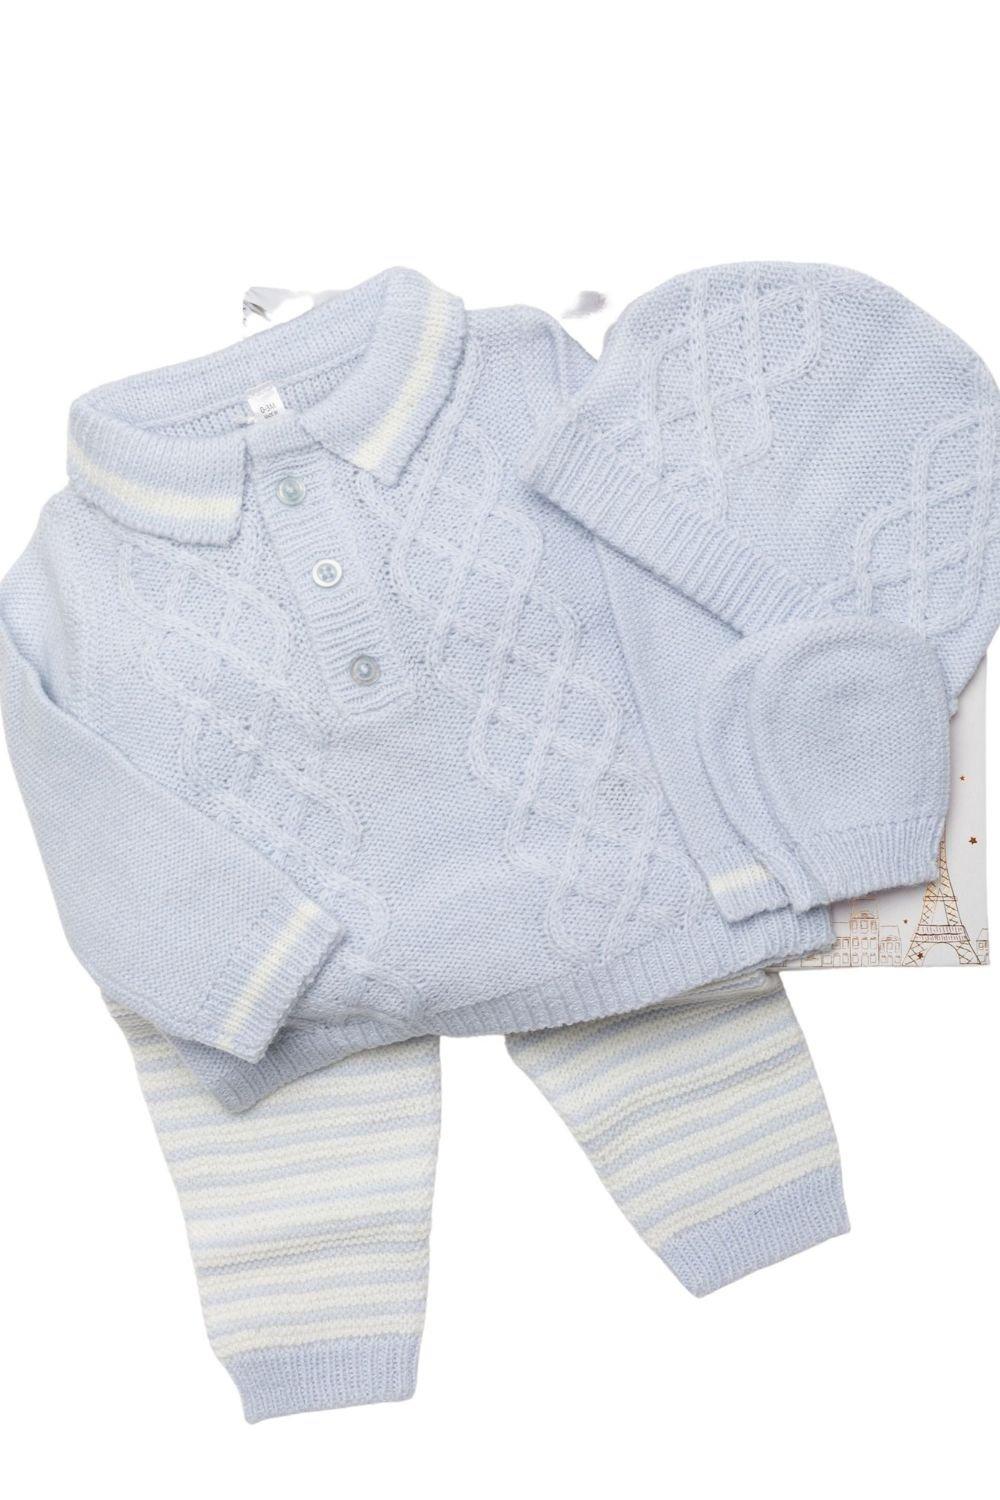 Baby Boy Girl Clothes Gift Box Set Newborn 0-6 Months Knitwear Jumper Trousers Mitts Hat